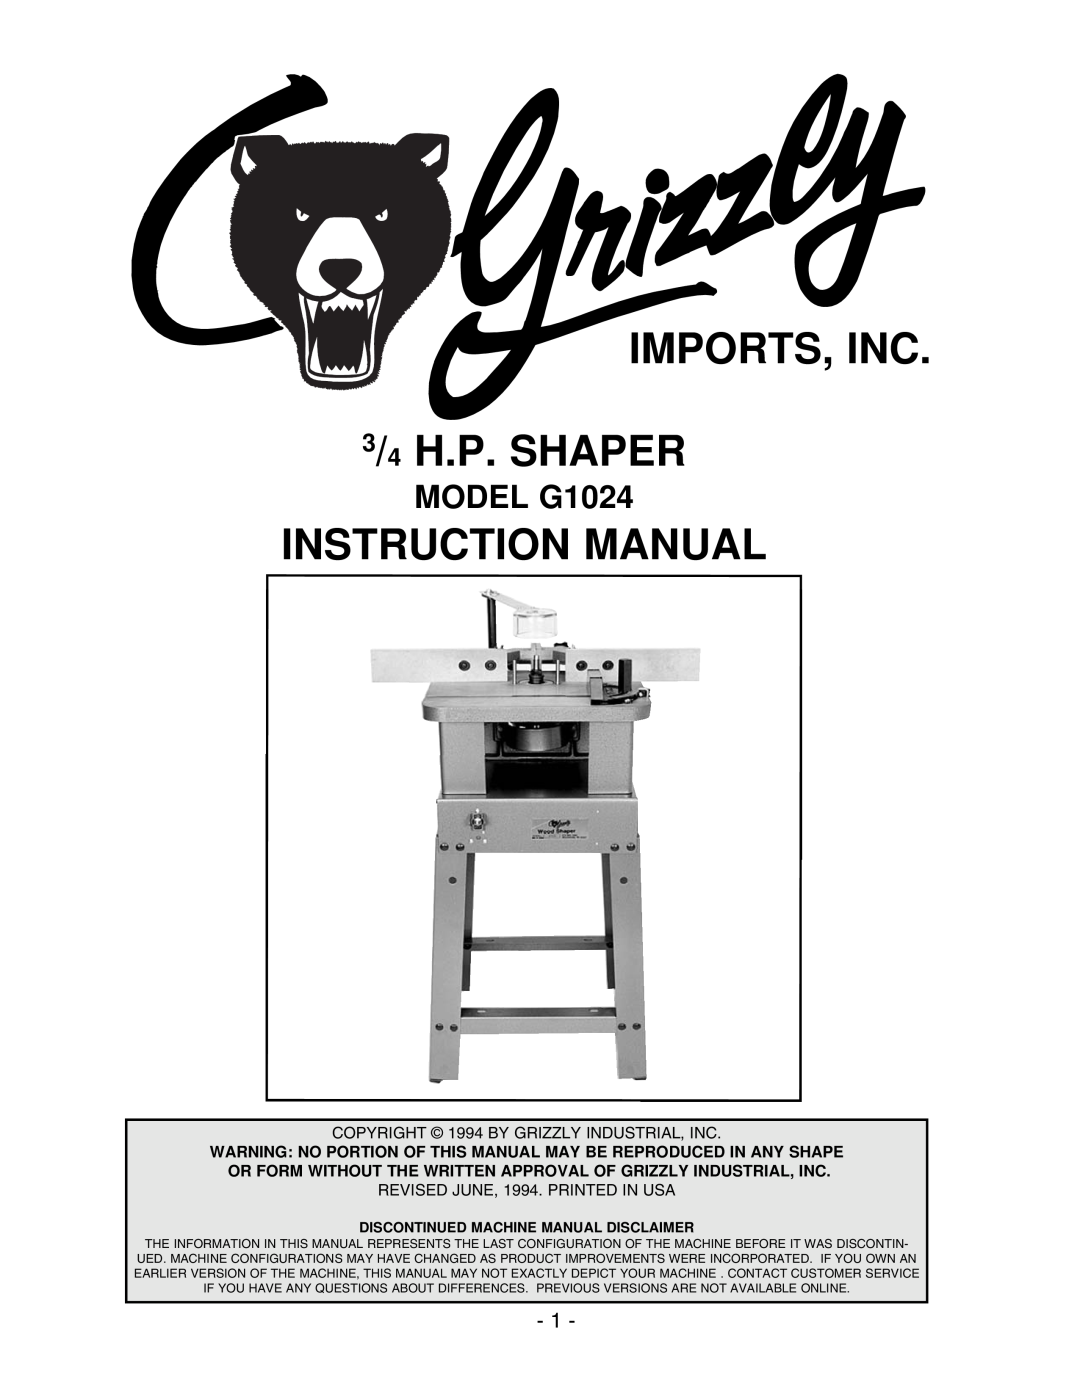 Grizzly instruction manual MODEL G1024, IMPORTS, INC 3/4 H.P. SHAPER, COPYRIGHT 1994 BY GRIZZLY INDUSTRIAL, INC 